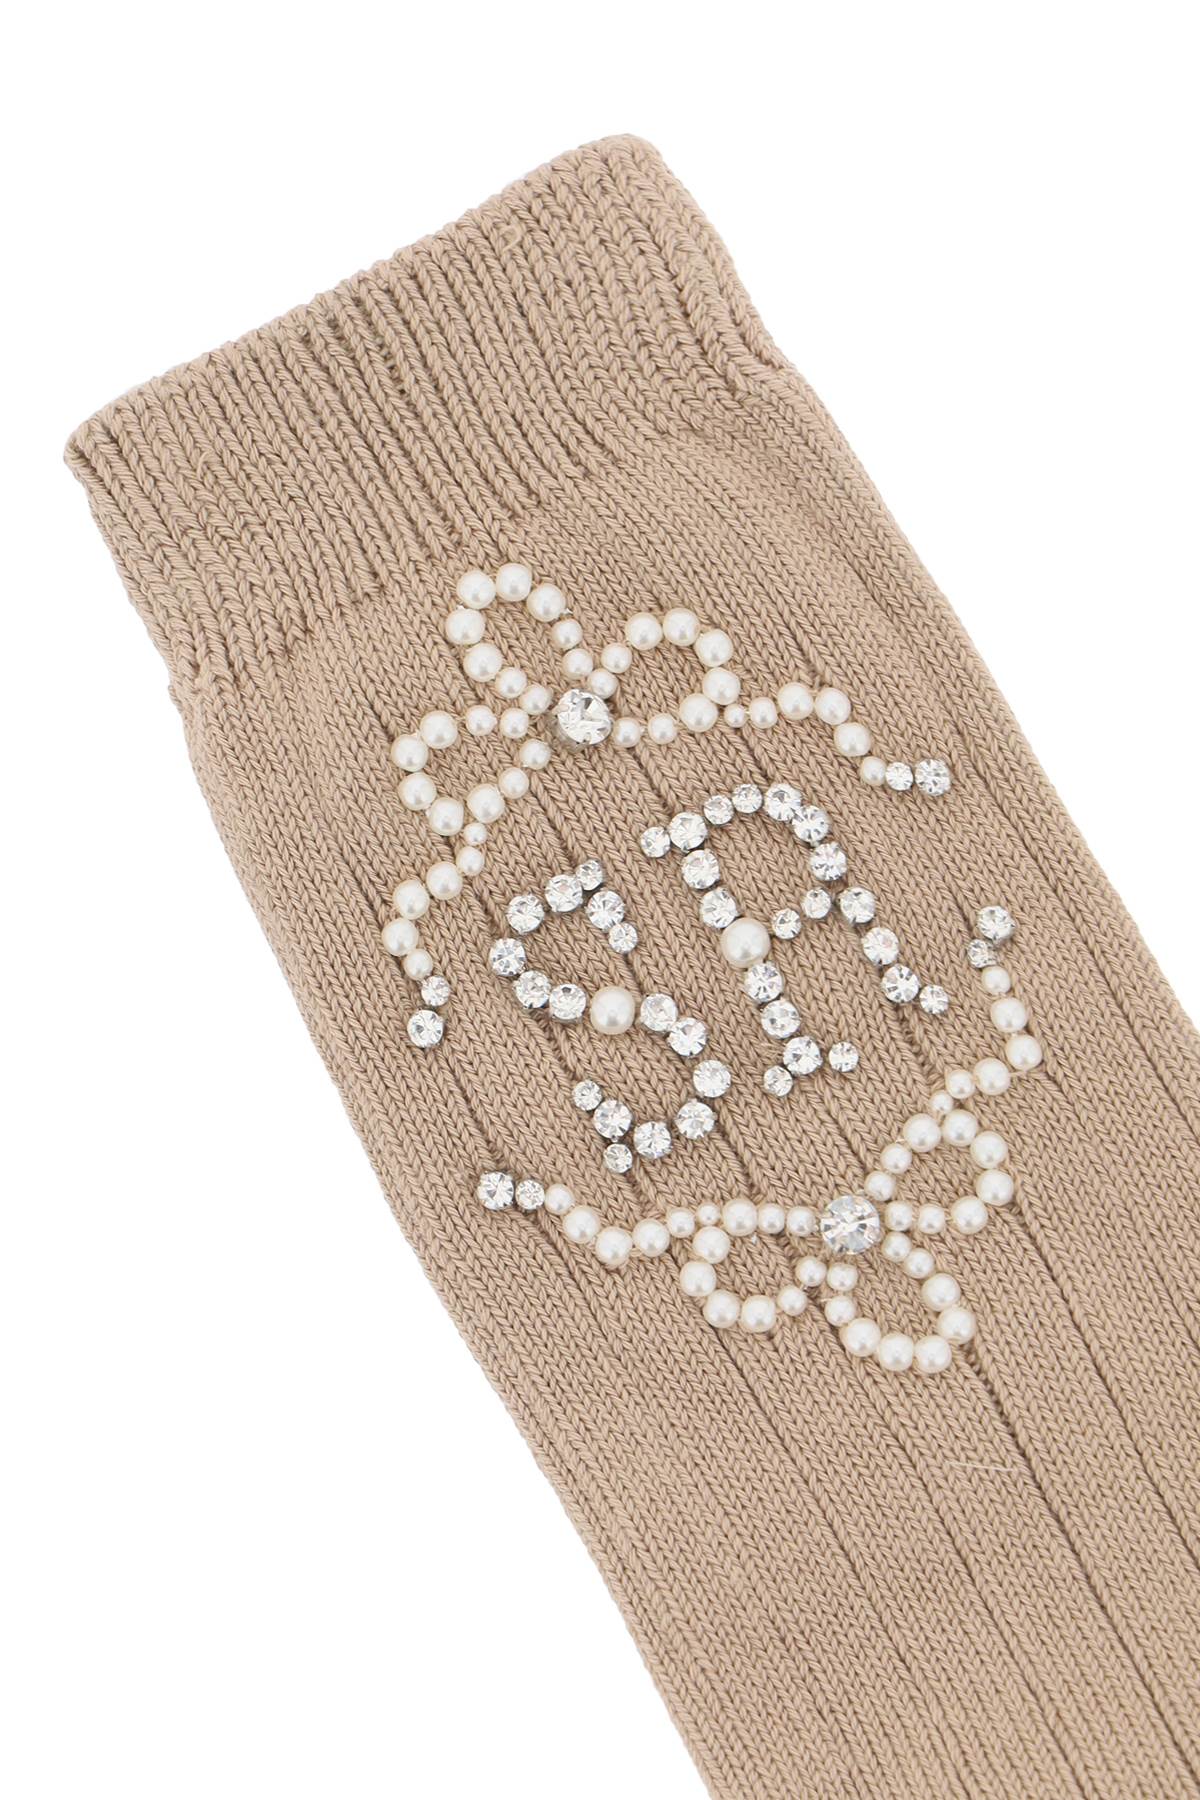 Simone rocha sr socks with pearls and crystals-2